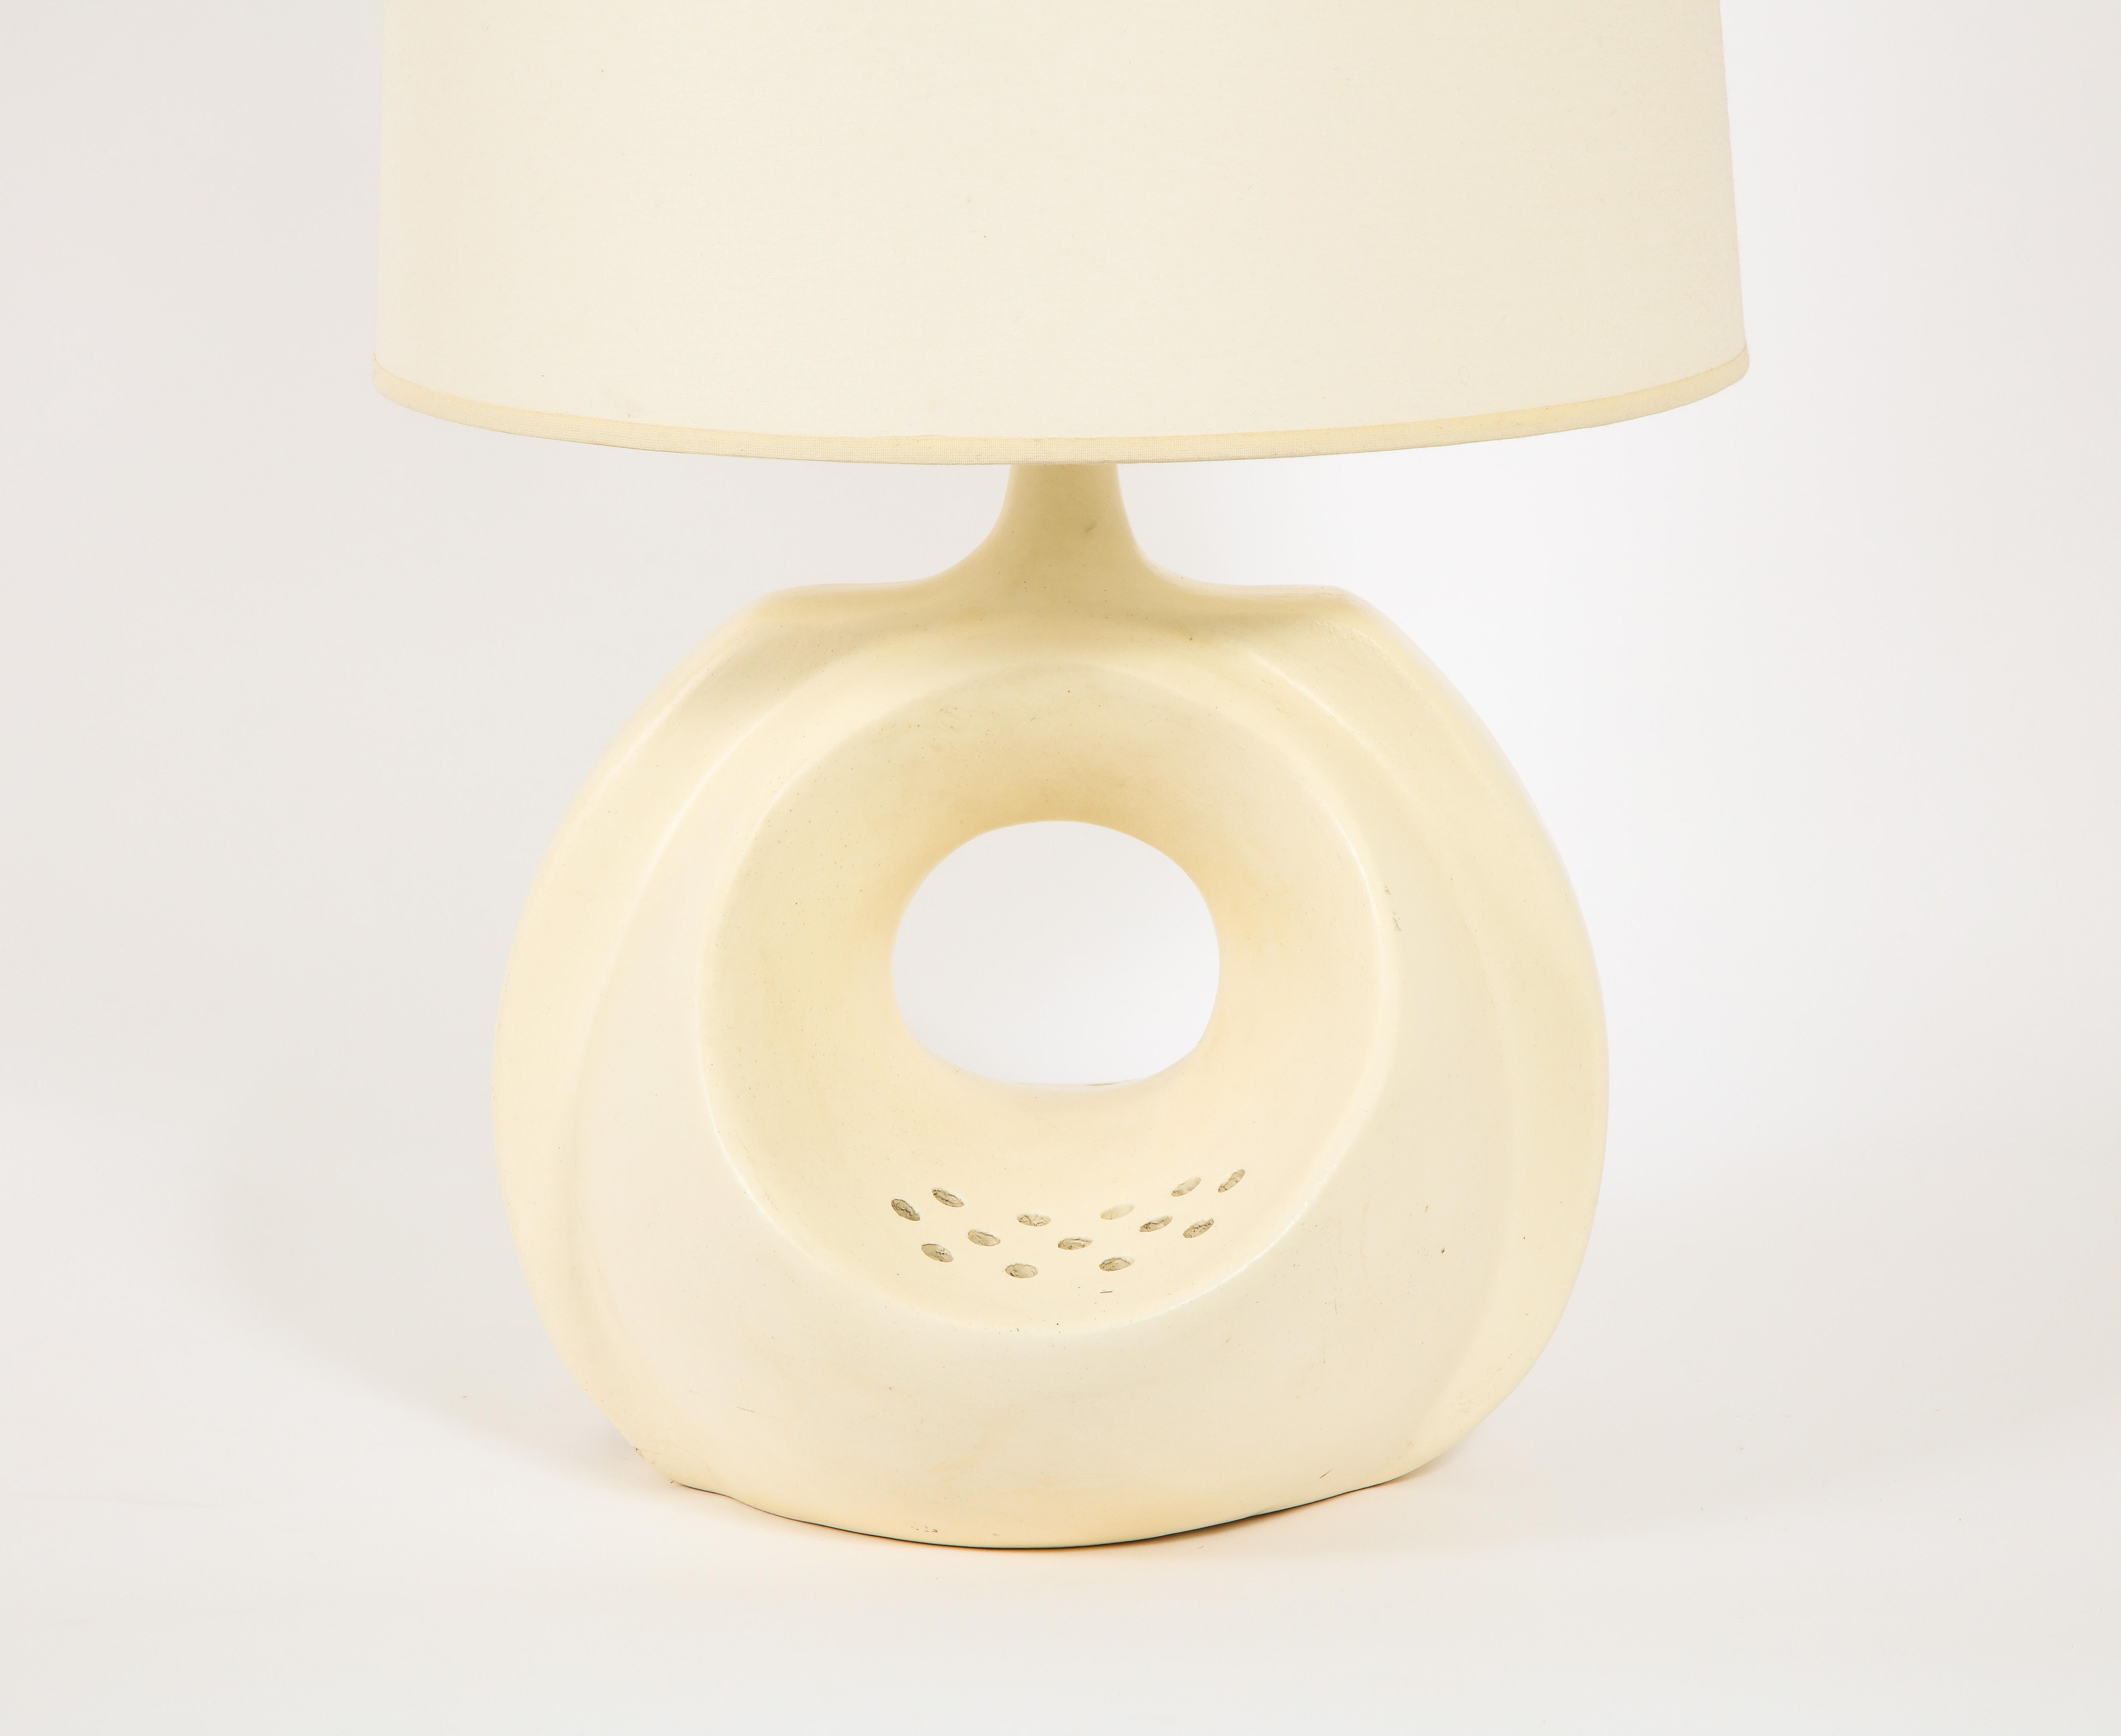 Amazing pottery studio lamp in a matte glaze, one uplight, and an inner light that glows through the cutouts seen in the curved opening below the neck. 

Shade not included.